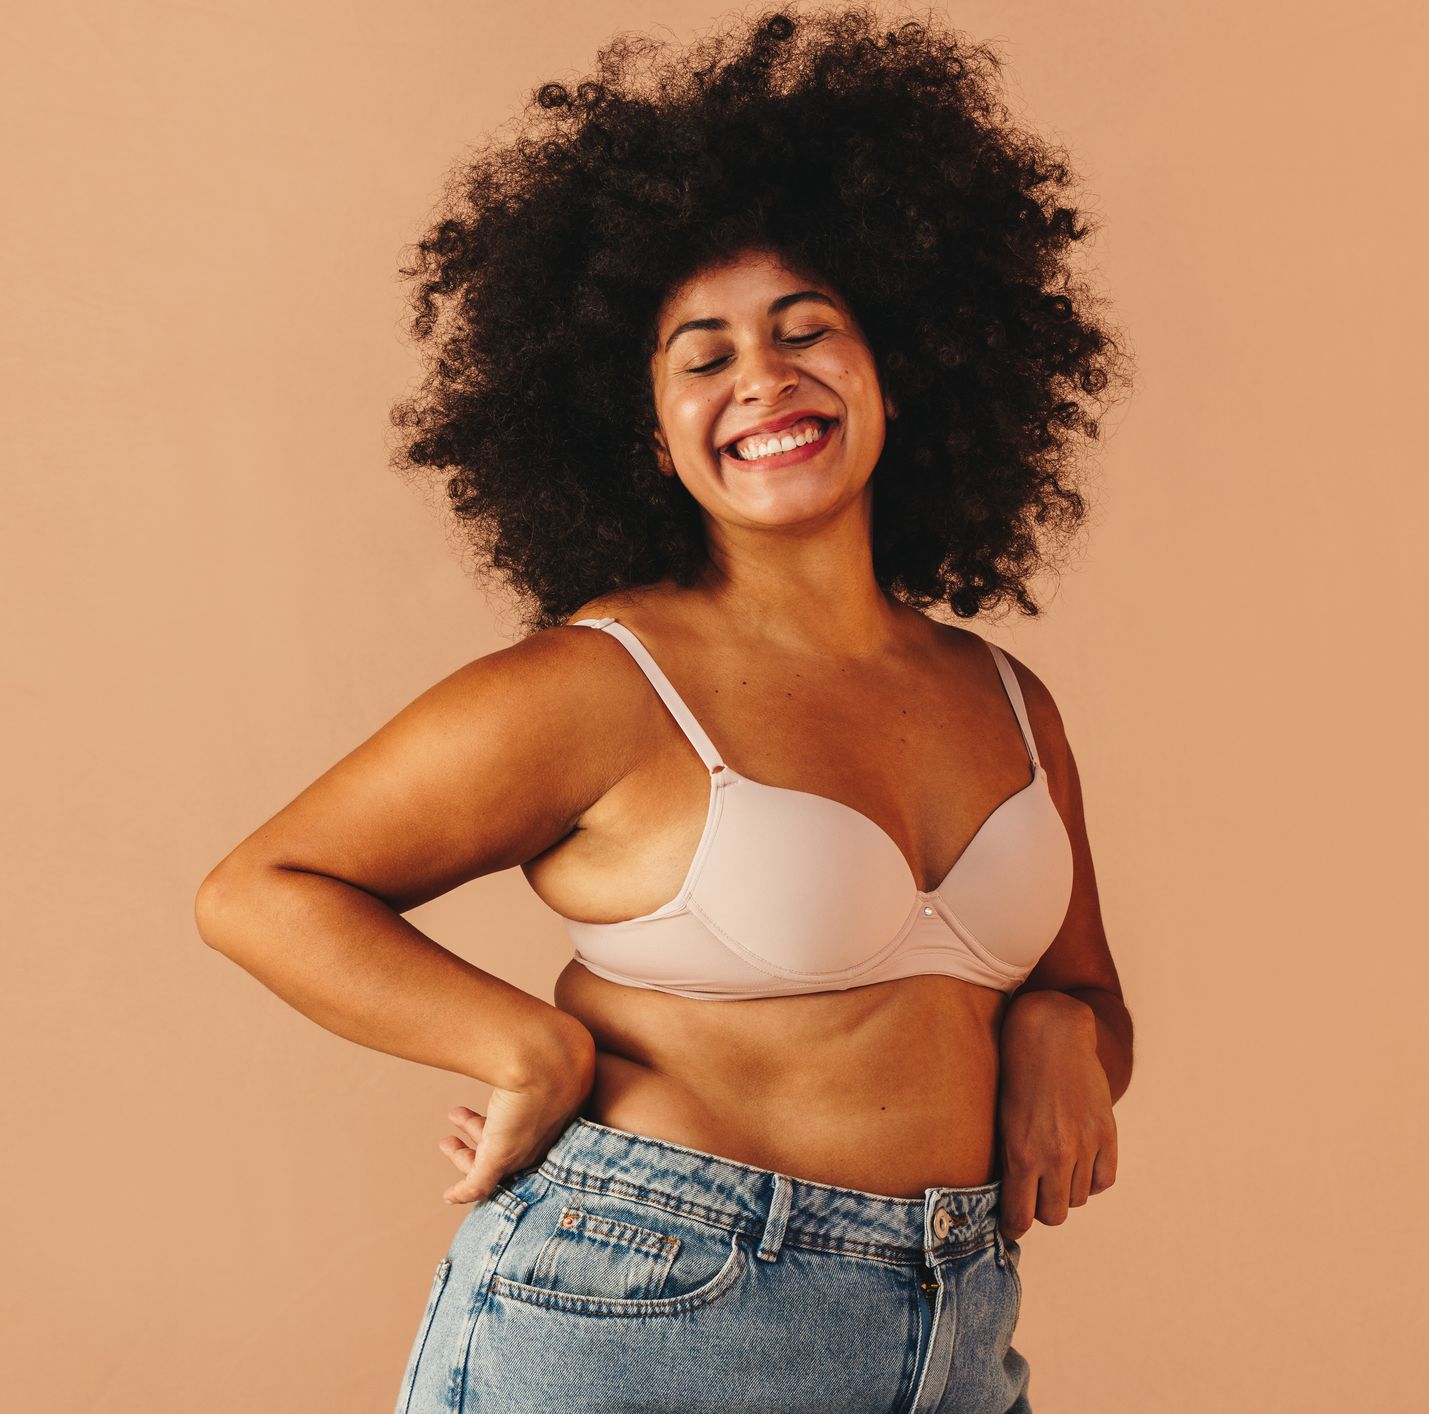 self confident young woman smiling happily while wearing a bra and jeans in a studio